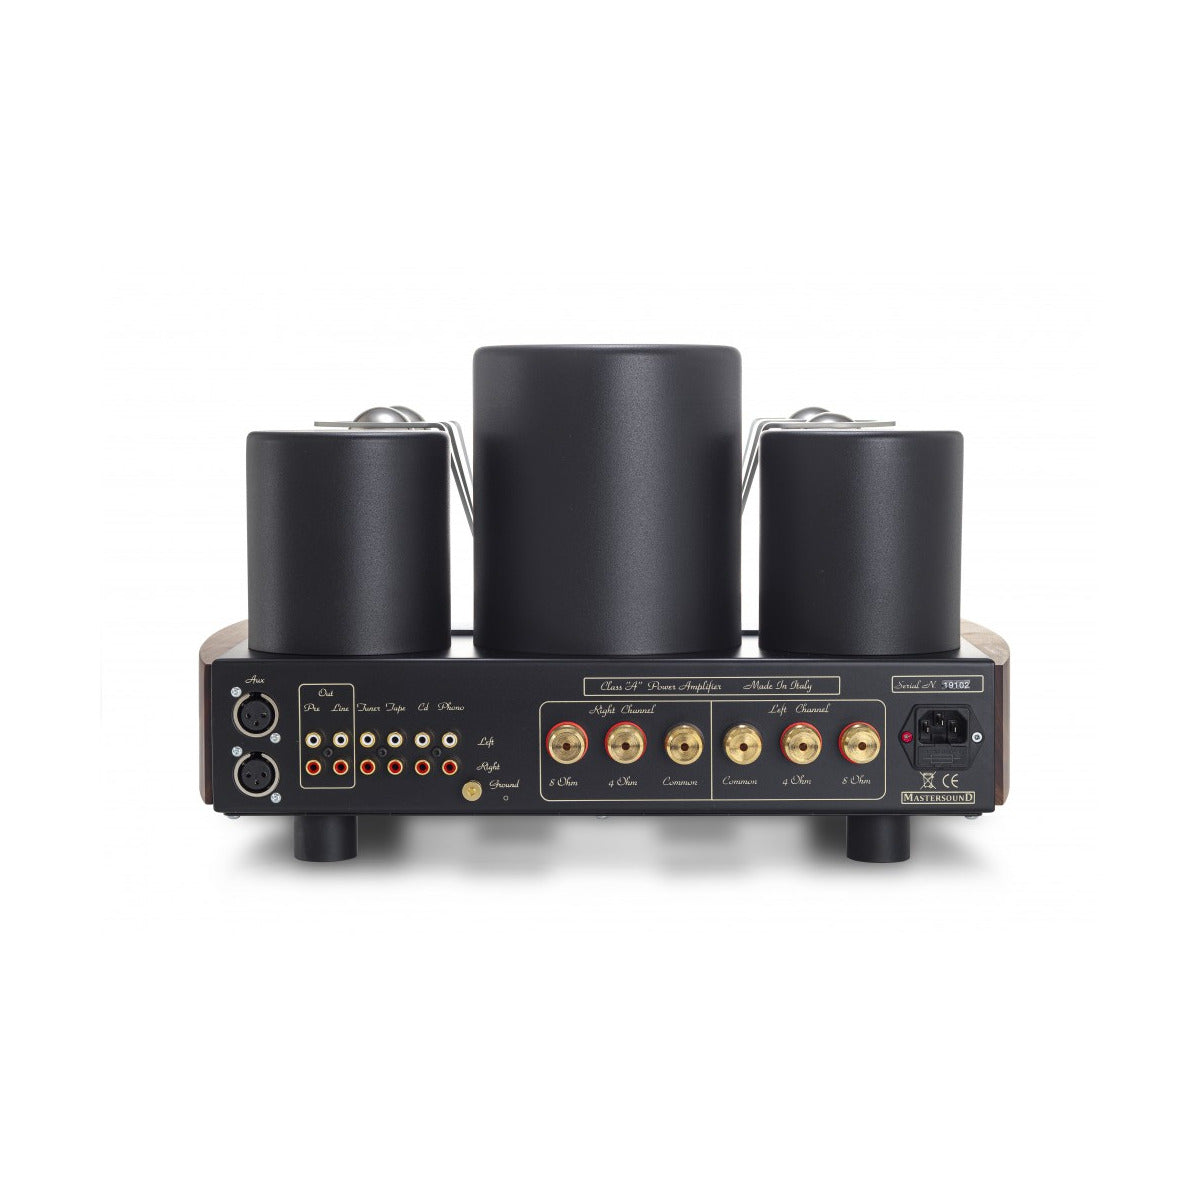 MASTERSOUND GEMINI INTEGRATED AMPLIFIER